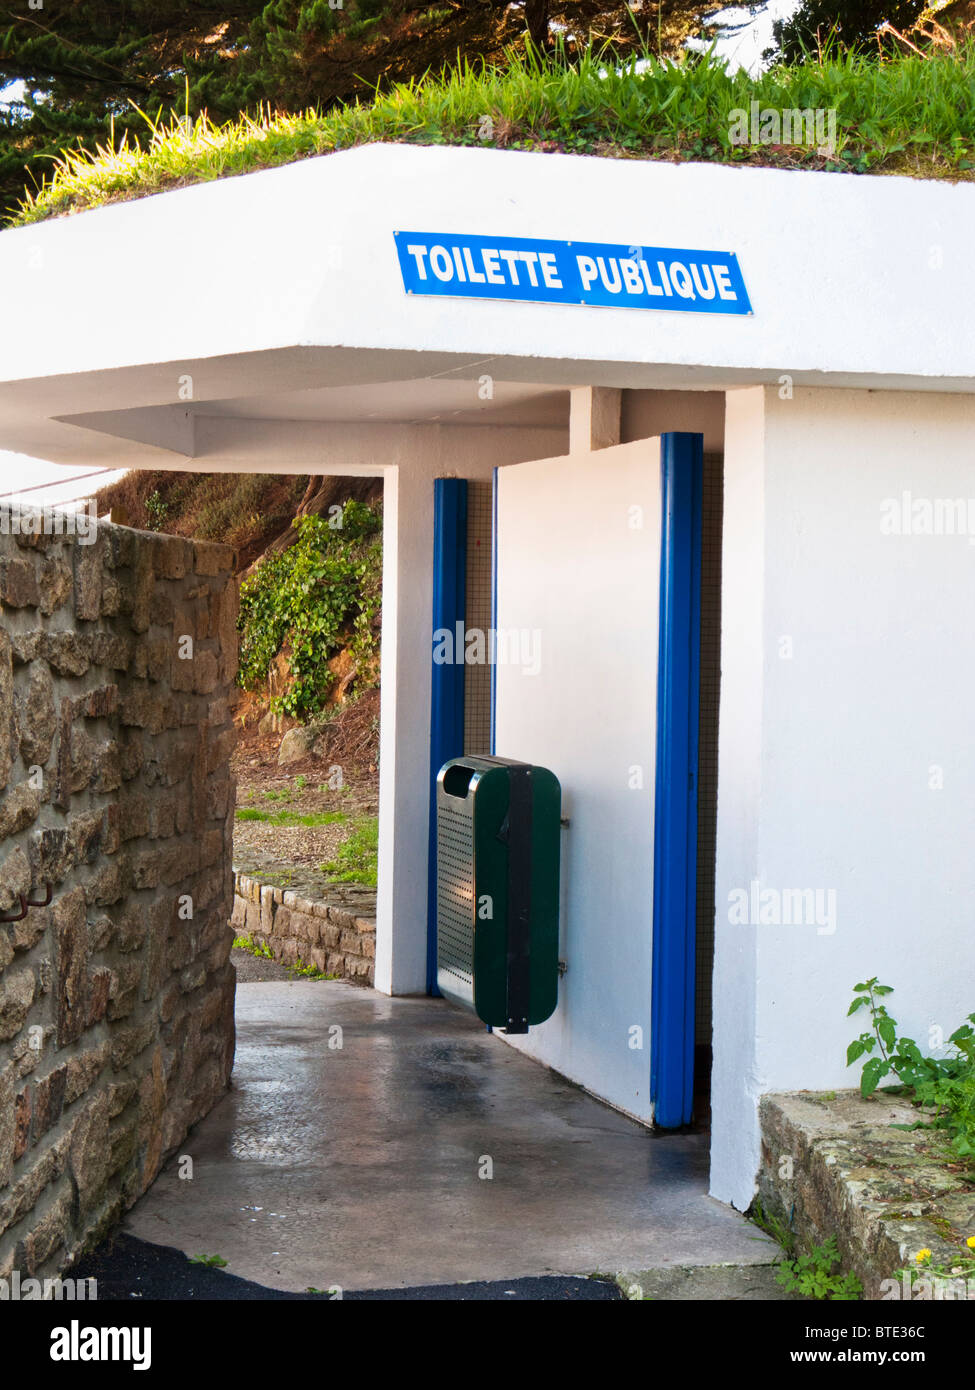 Public Toilet in France Europe Stock Photo